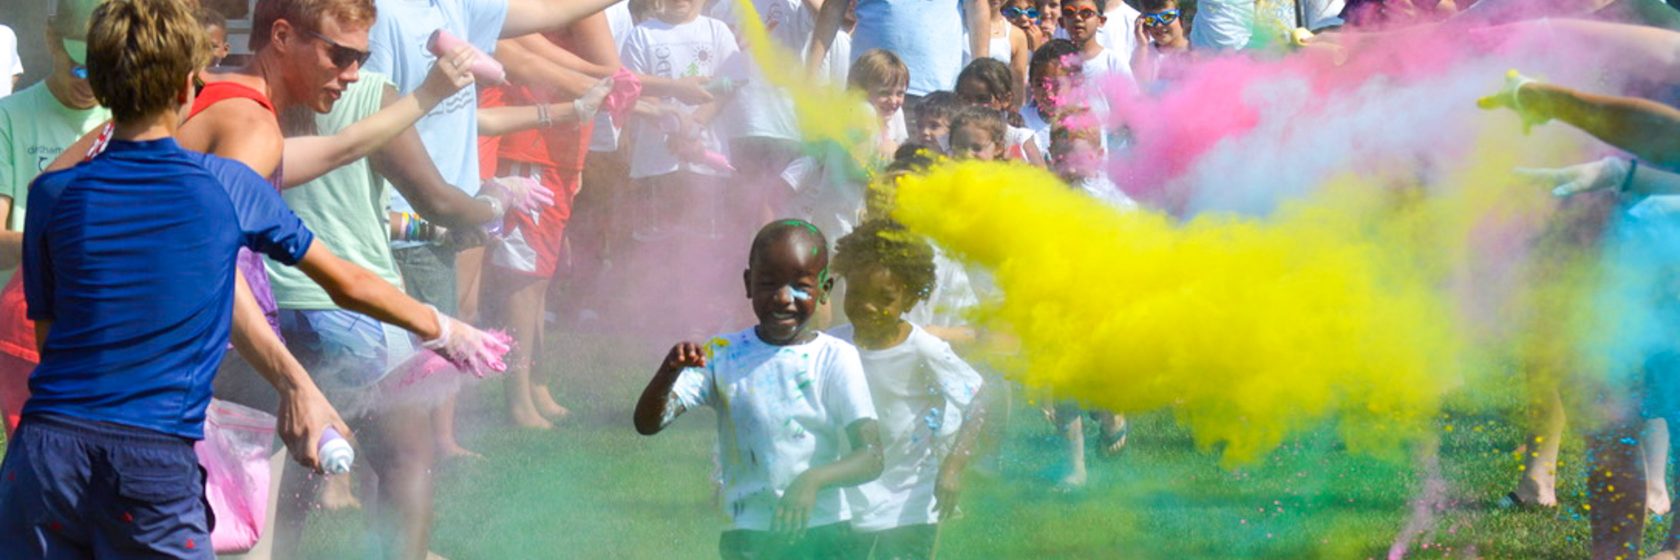 Campers running through colorful powder during camp.